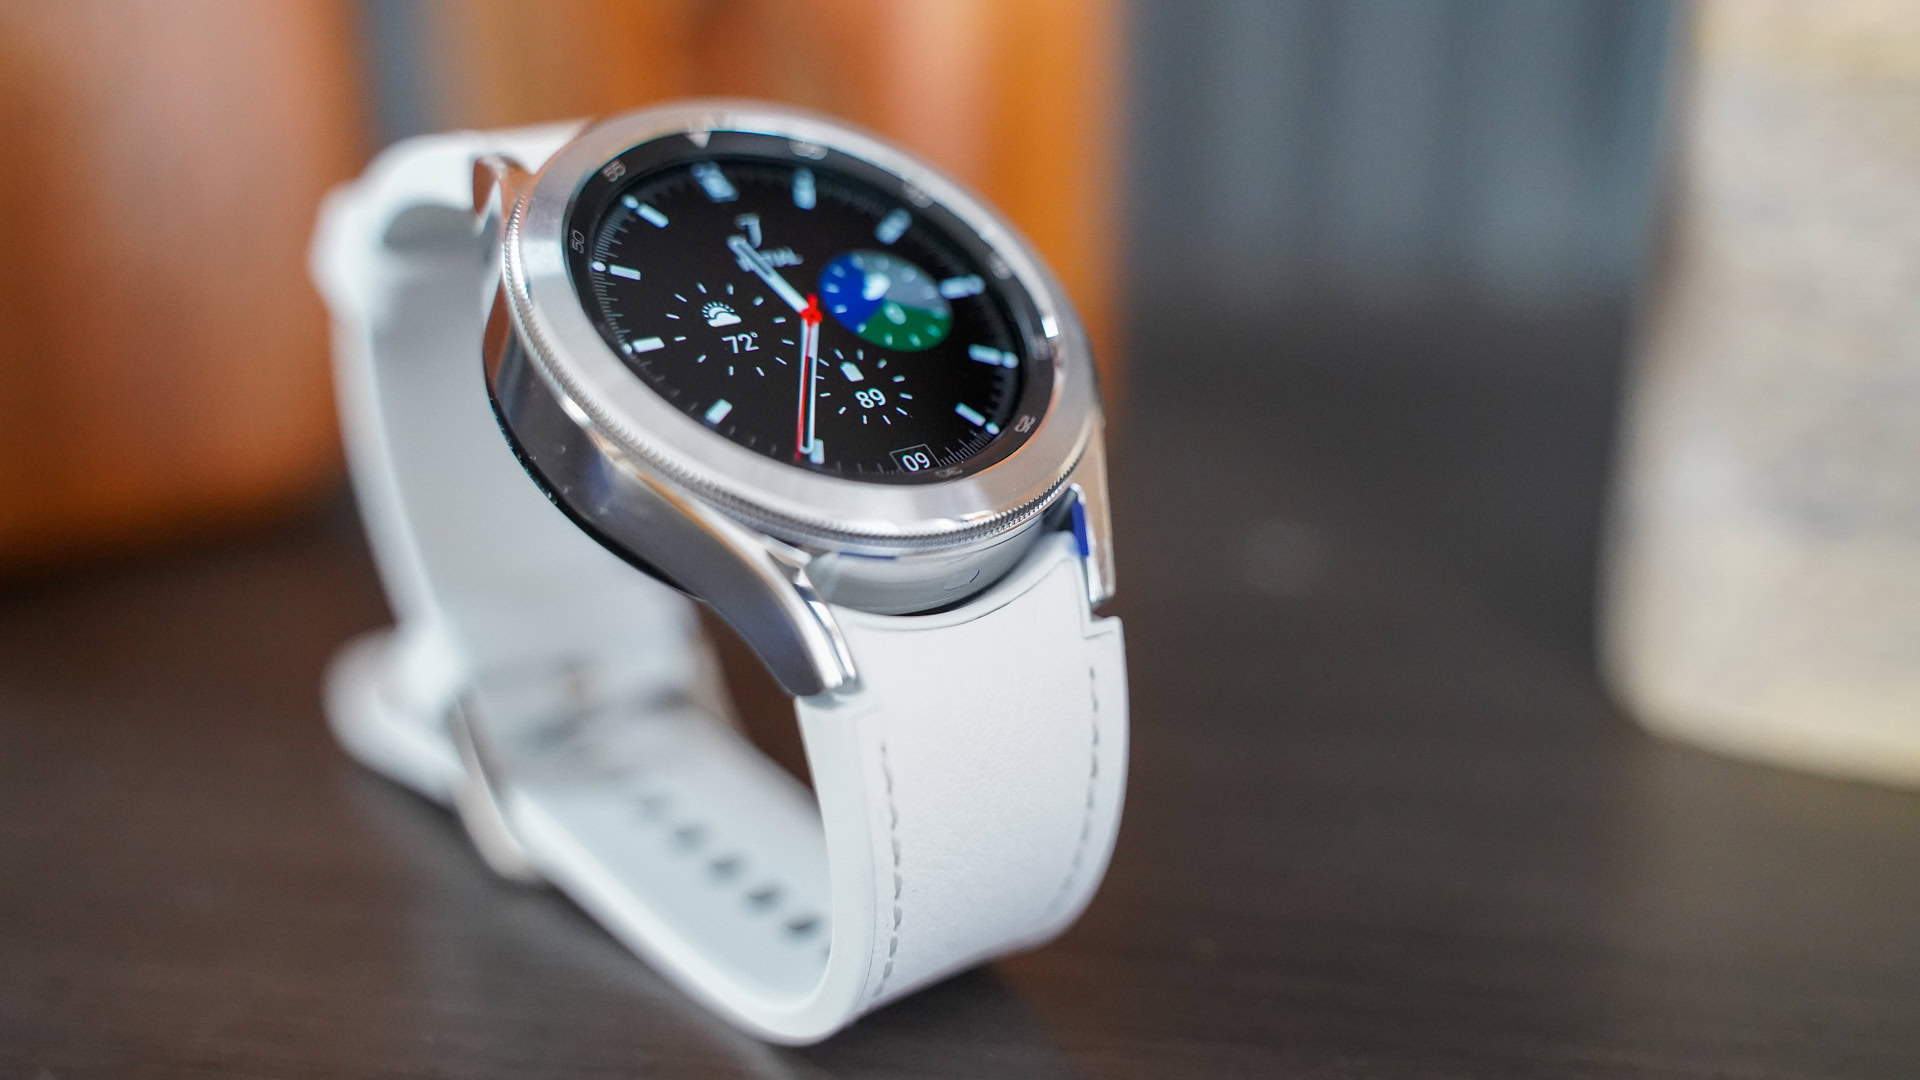 The Samsung Galaxy Watch 4 Classic is at its lowest price ever